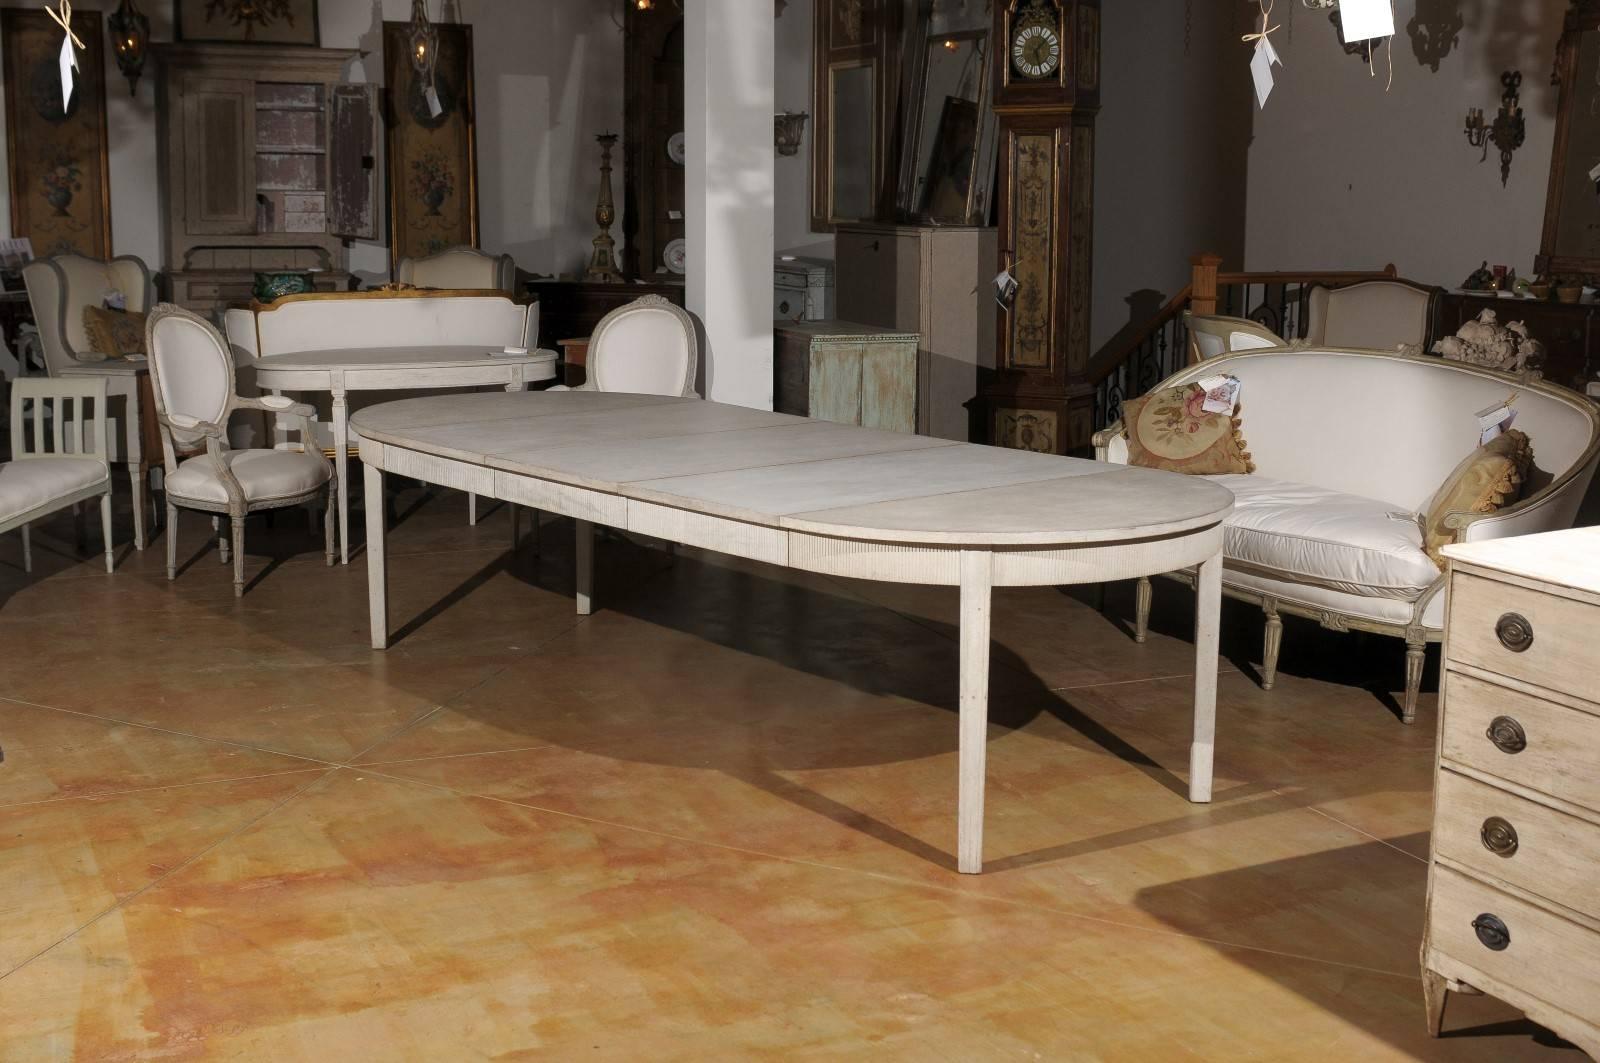 19th Century Swedish Gustavian Style Extension Dining Room Table with Three Leaves and Apron